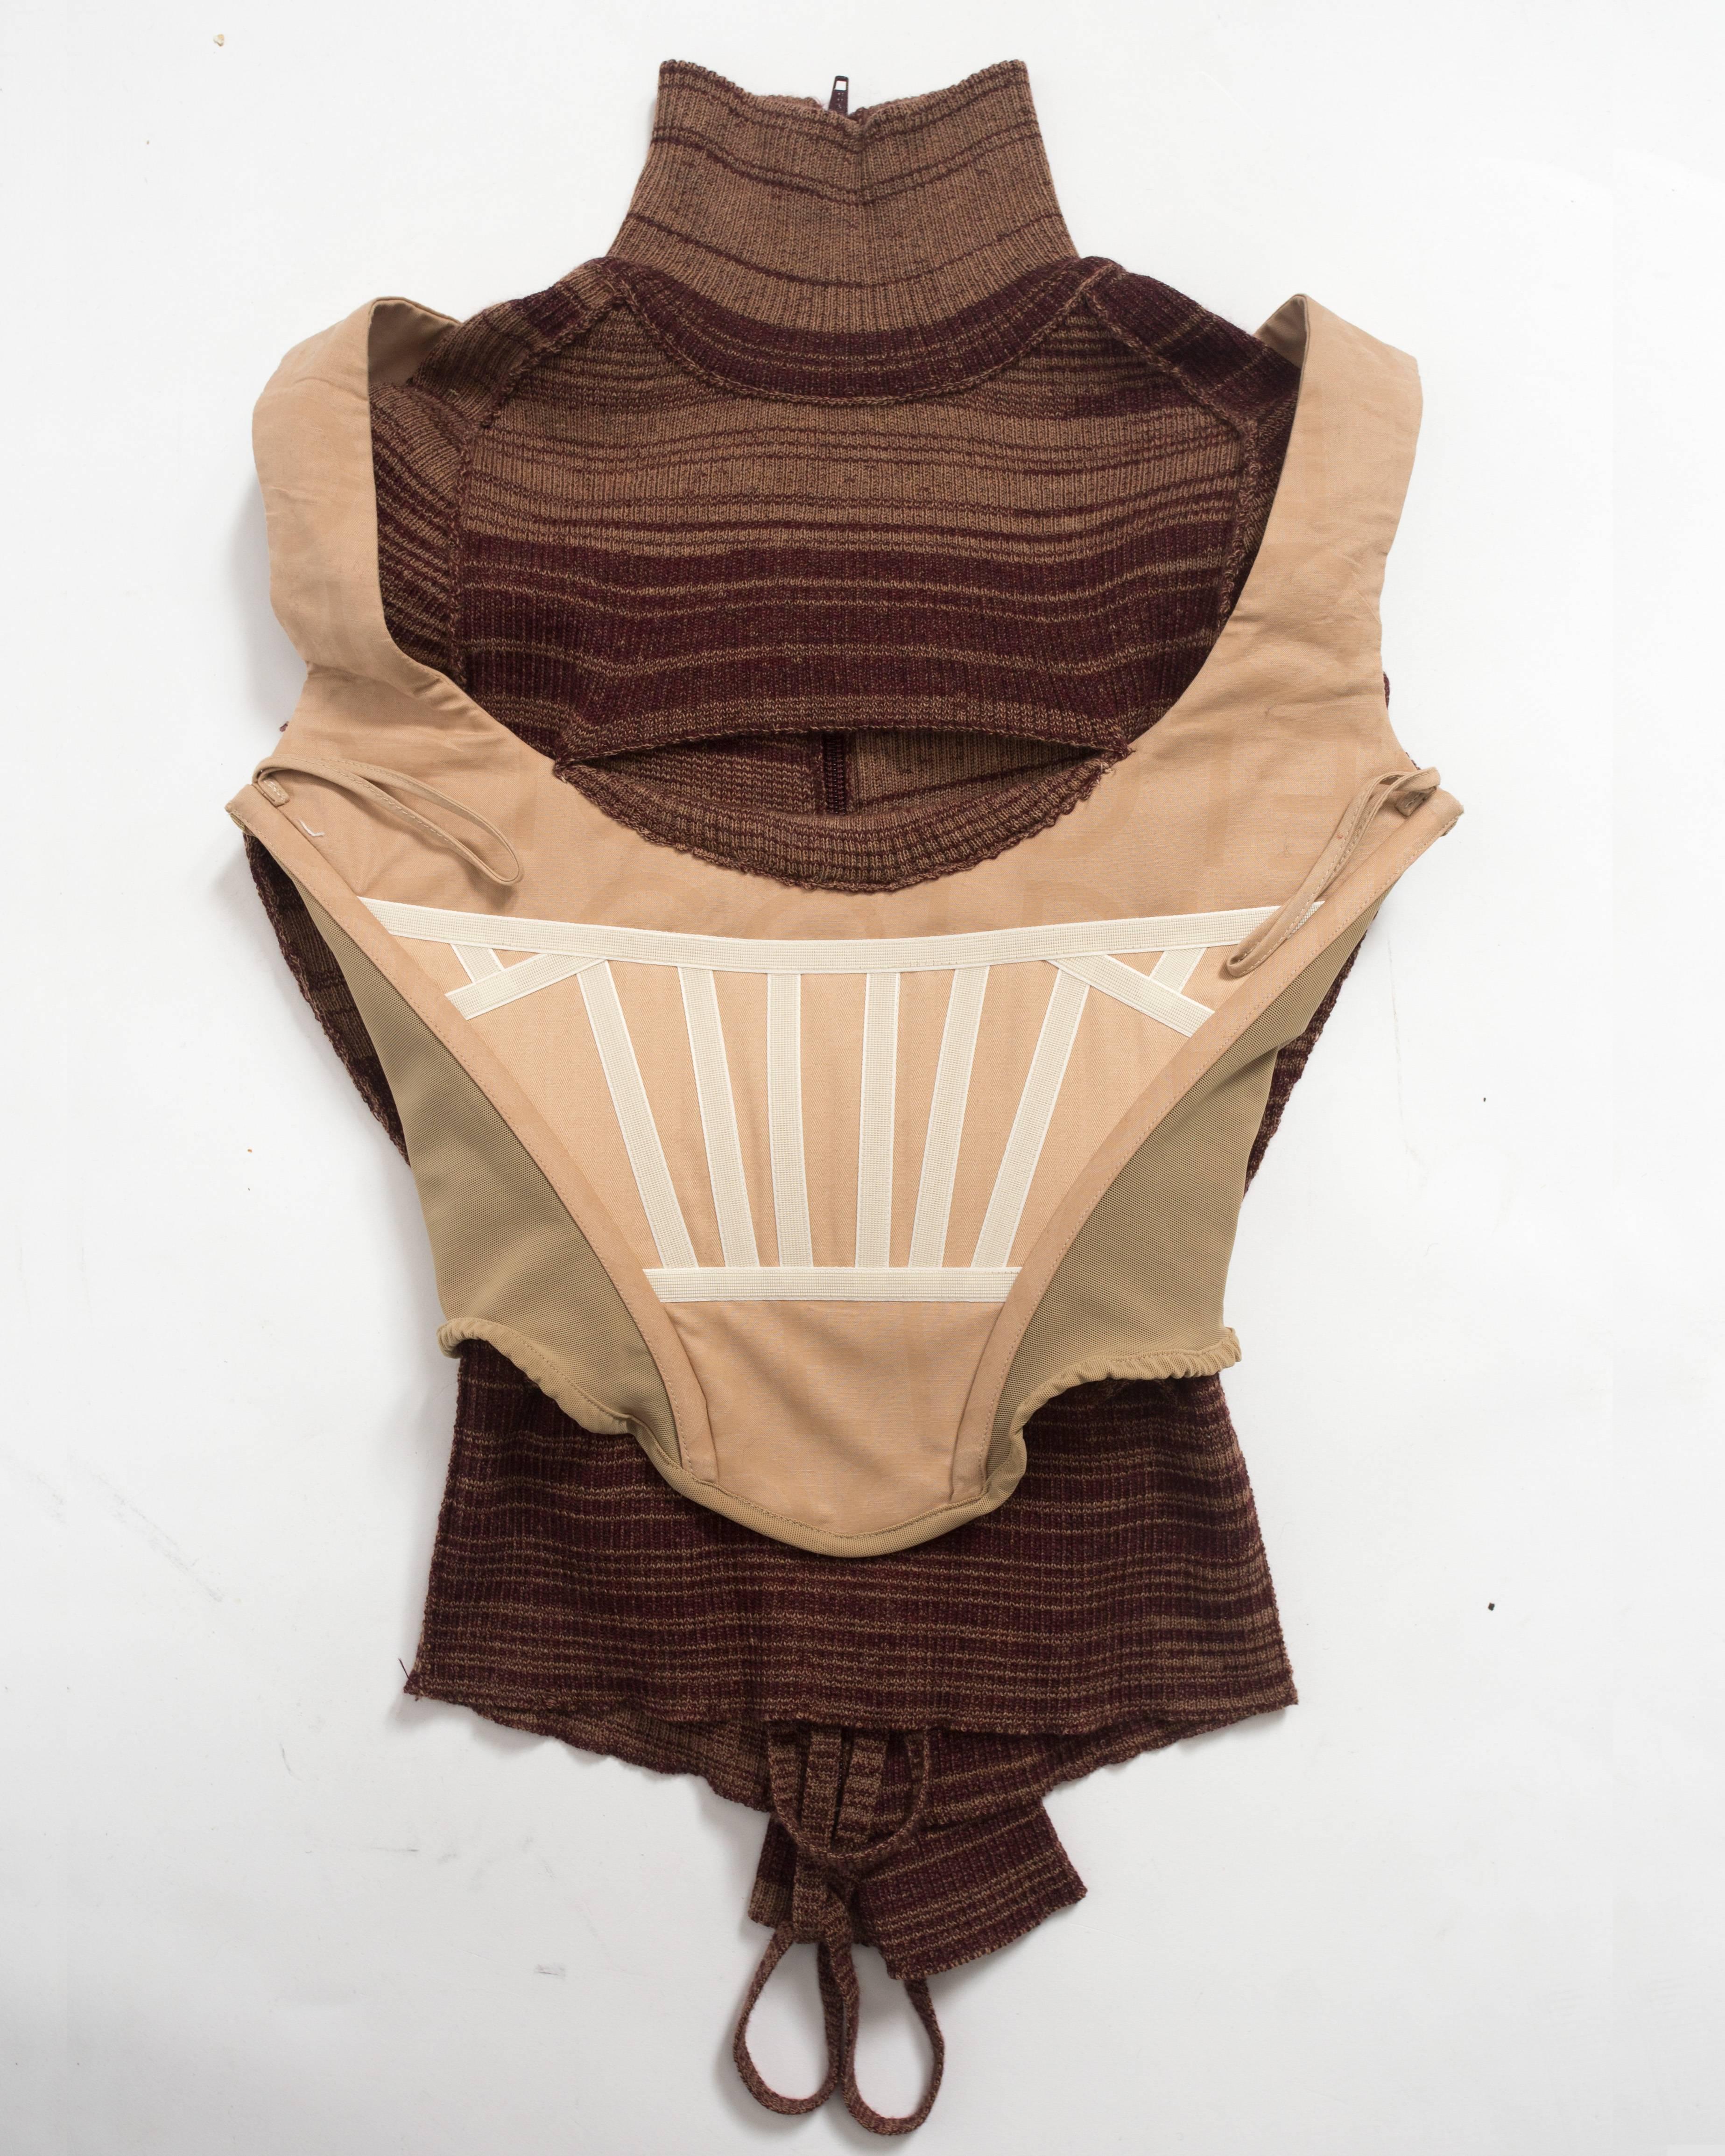 Vivienne Westwood striped wool sweater with internal corset, zip closure at the back and cut out cleavage. 